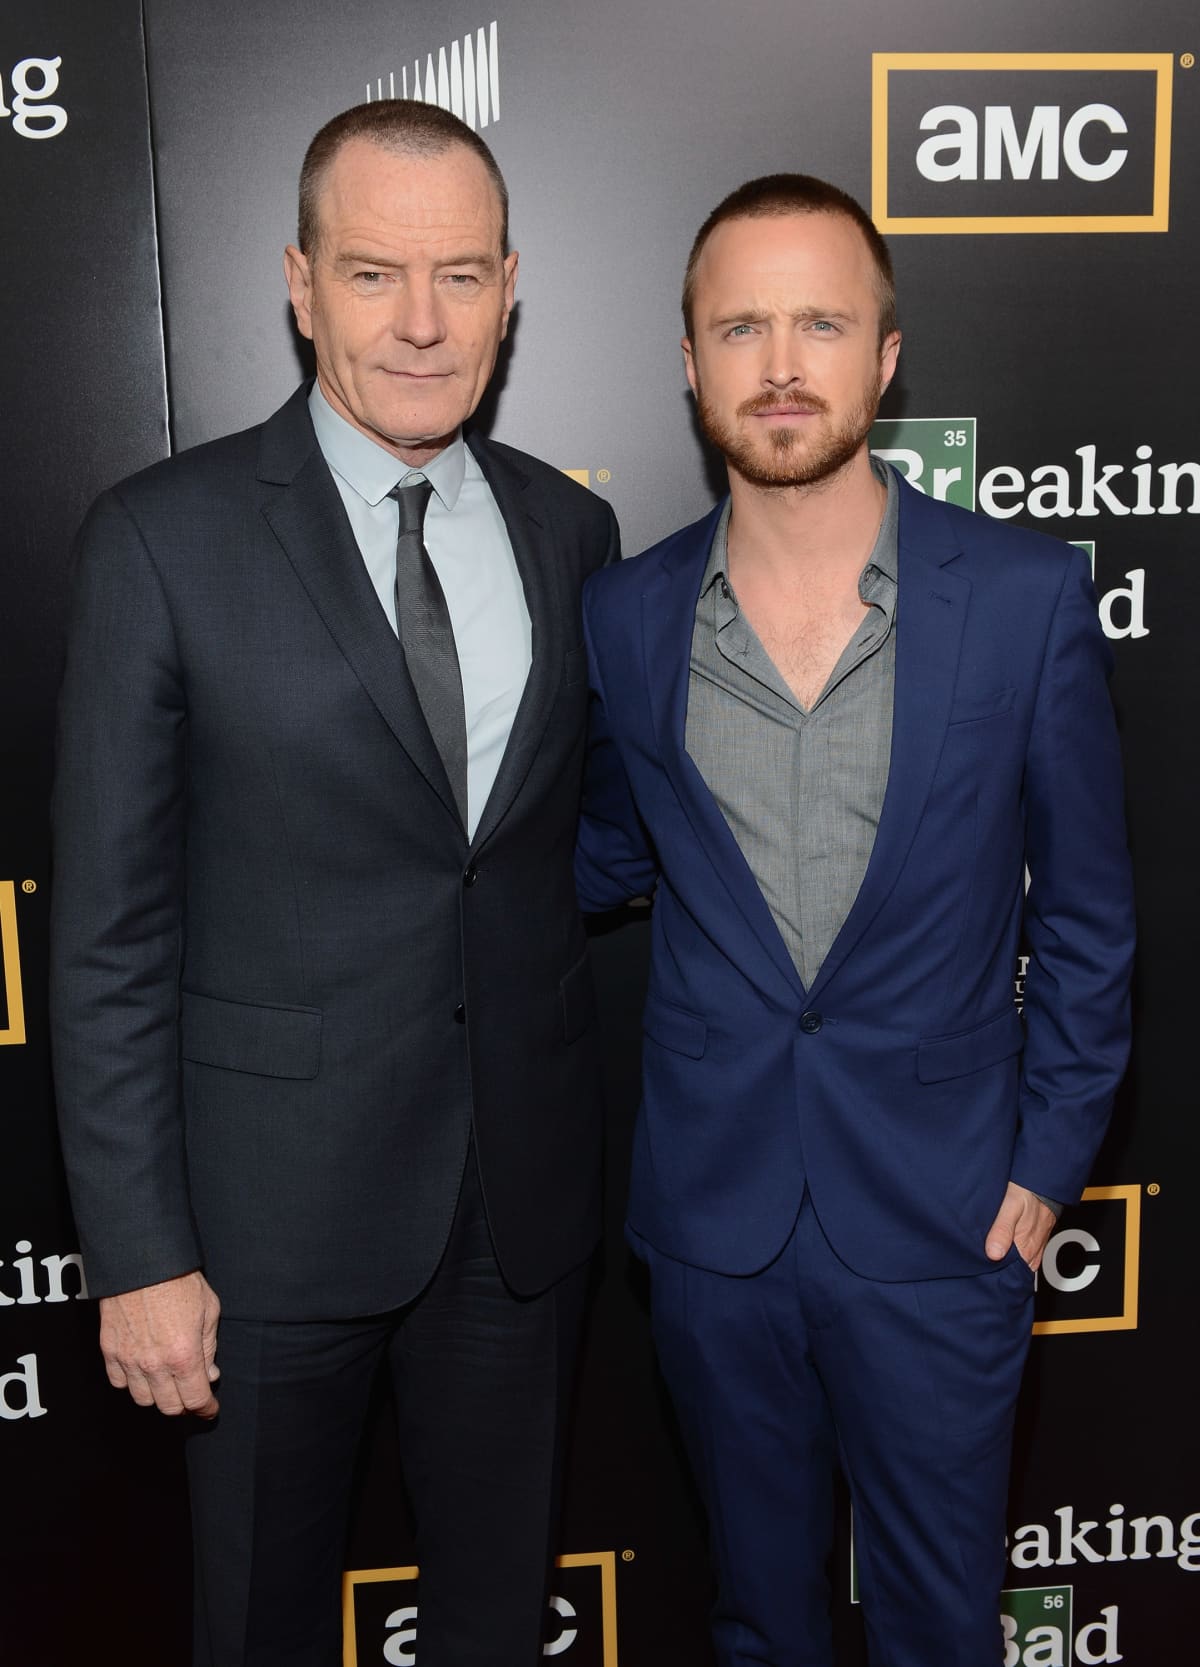 CULVER CITY, CA - JULY 24:  Actors Bryan Cranston and Aaron Paul arrive as AMC Celebrates the final episodes of "Breaking Bad" at Sony Pictures Studios on July 24, 2013 in Culver City, California.  (Photo by Mark Davis/Getty Images)